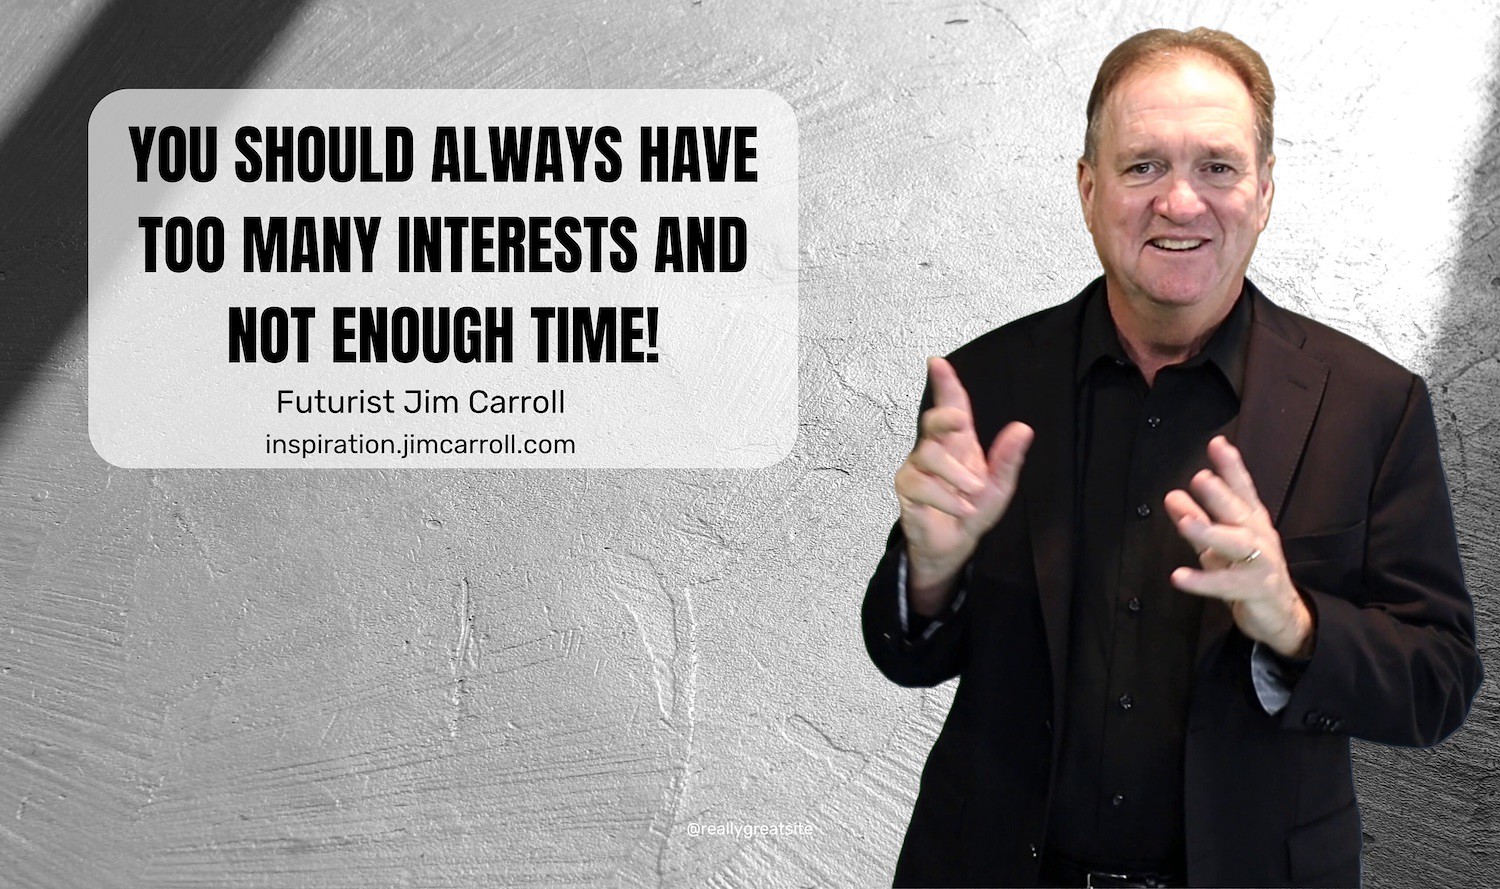 "You should always have too many interests and not enough time!" - Futurist Jim Carroll